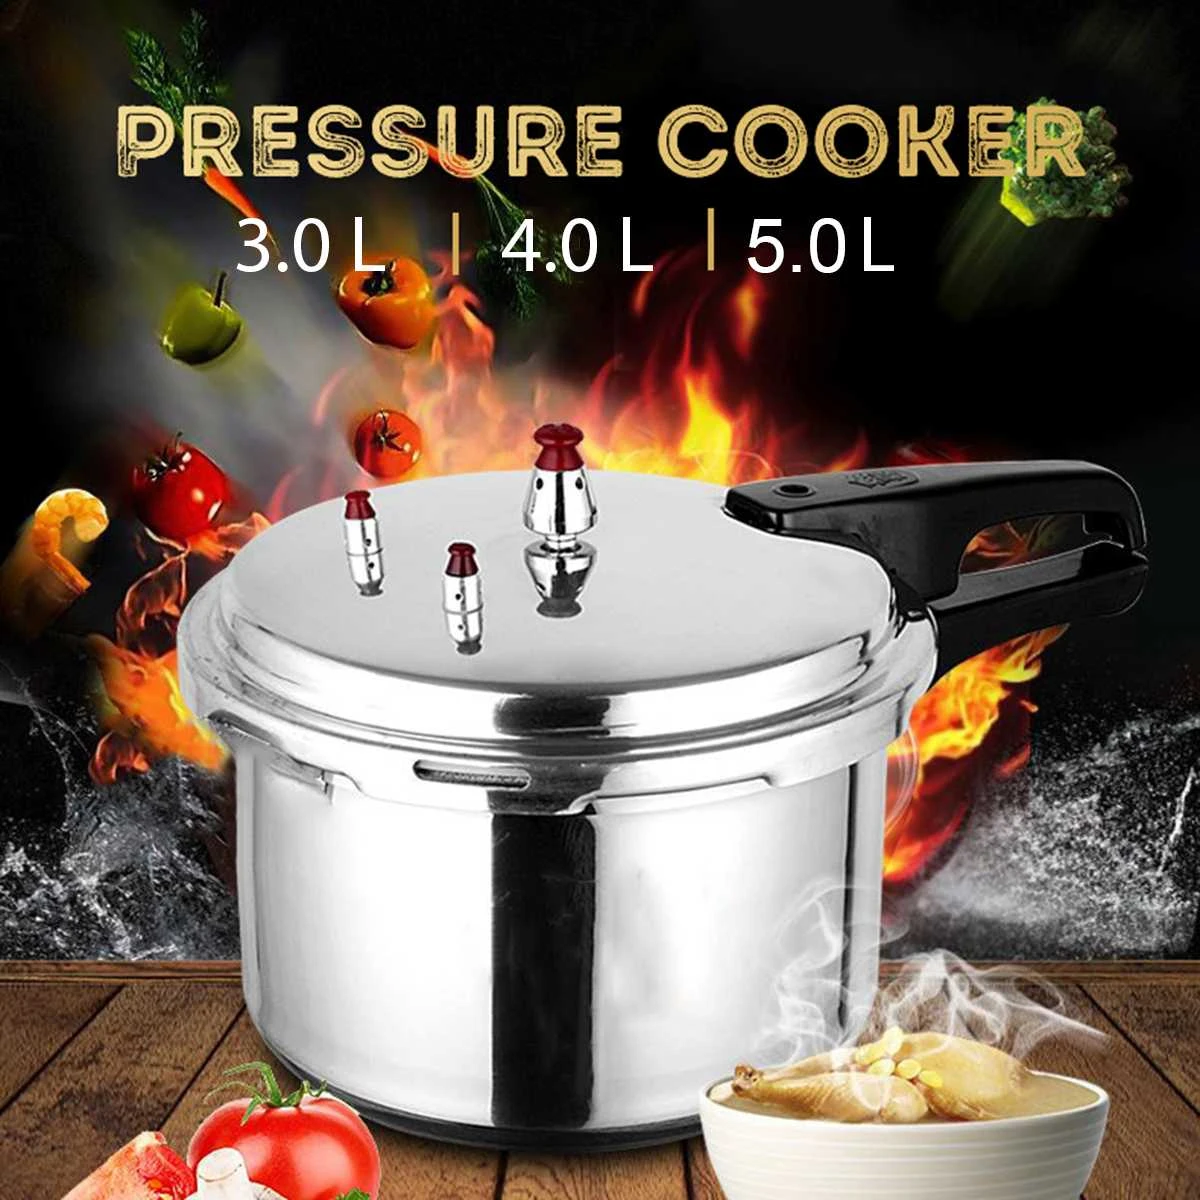 Kitchen Pressure Cooker Cookware Soup Meats Pot 18 20 22cm Gas Stove Open Fire Pressure Cooker Outdoor Camping Cook Tool Steamer Pressure Cookers Aliexpress